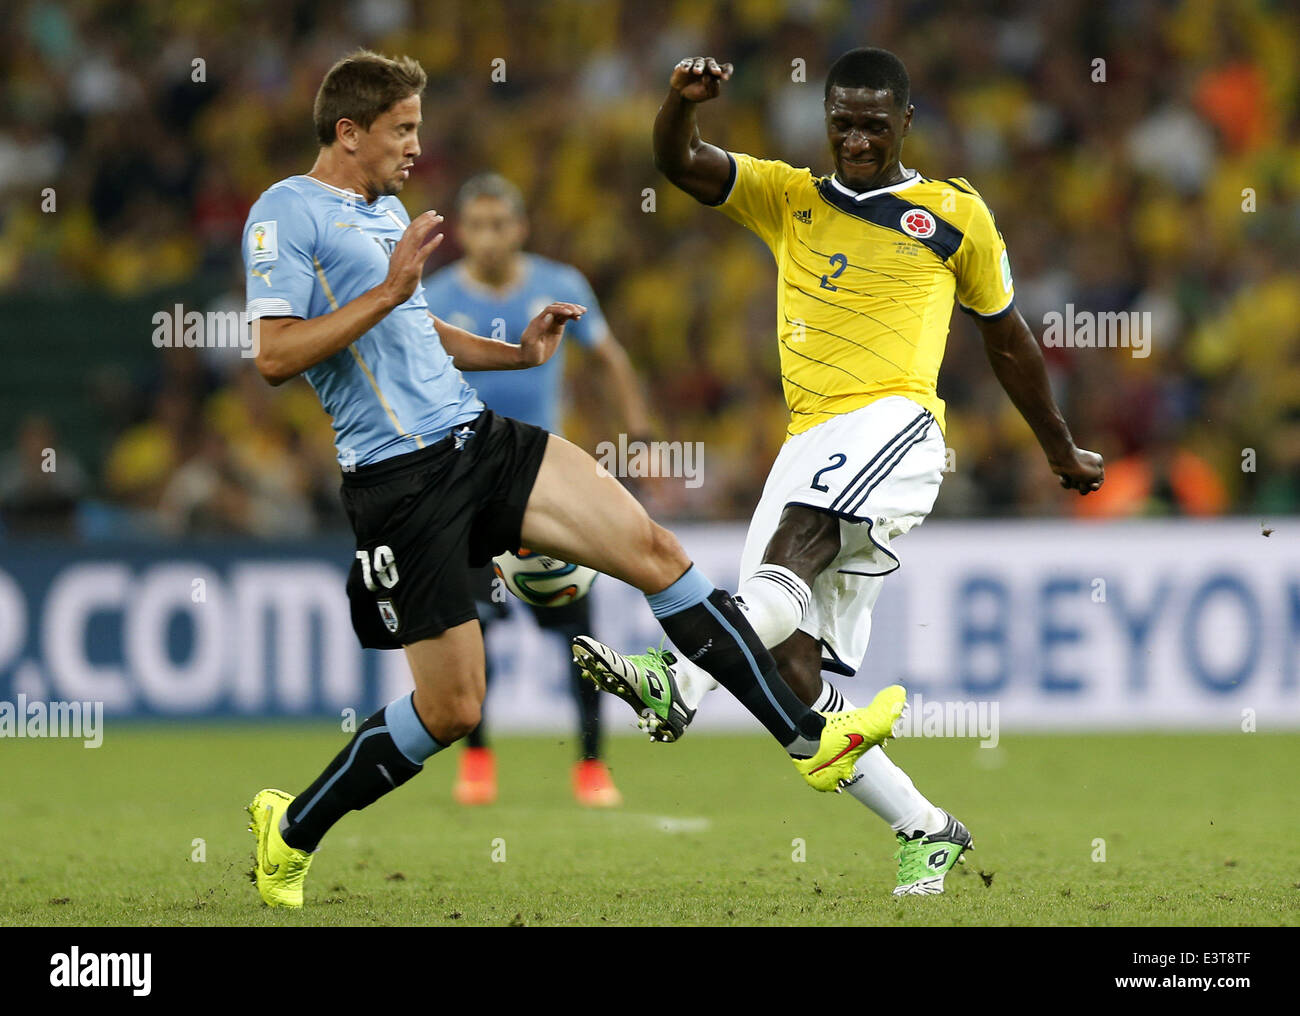 Rio De Janeiro, Brazil. 28th June, 2014. Uruguay's Diego Forlan (L, front) vies with Colombia's Cristian Zapata during a Round of 16 match between Colombia and Uruguay of 2014 FIFA World Cup at the Estadio do Maracana Stadium in Rio de Janeiro, Brazil, on June 28, 2014. Colombia won 2-0 over Uruguay and qualified for Quarter-finals on Saturday. Credit:  Wang Lili/Xinhua/Alamy Live News Stock Photo